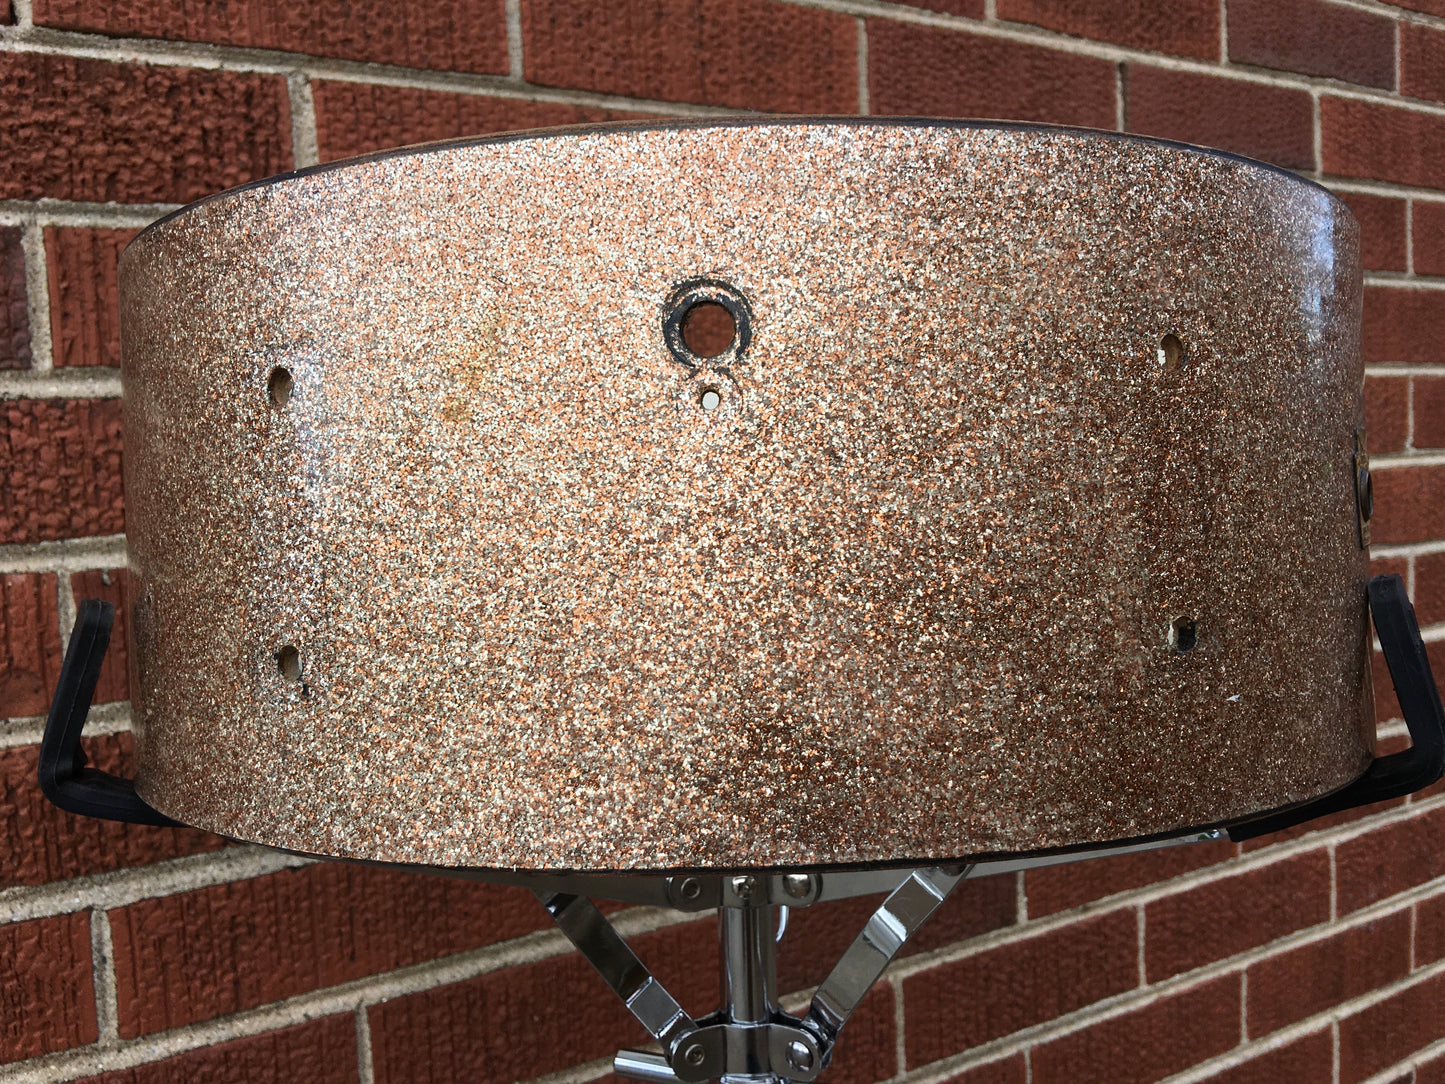 1966 Ludwig Pioneer Snare Drum Shell Champagne Sparkle